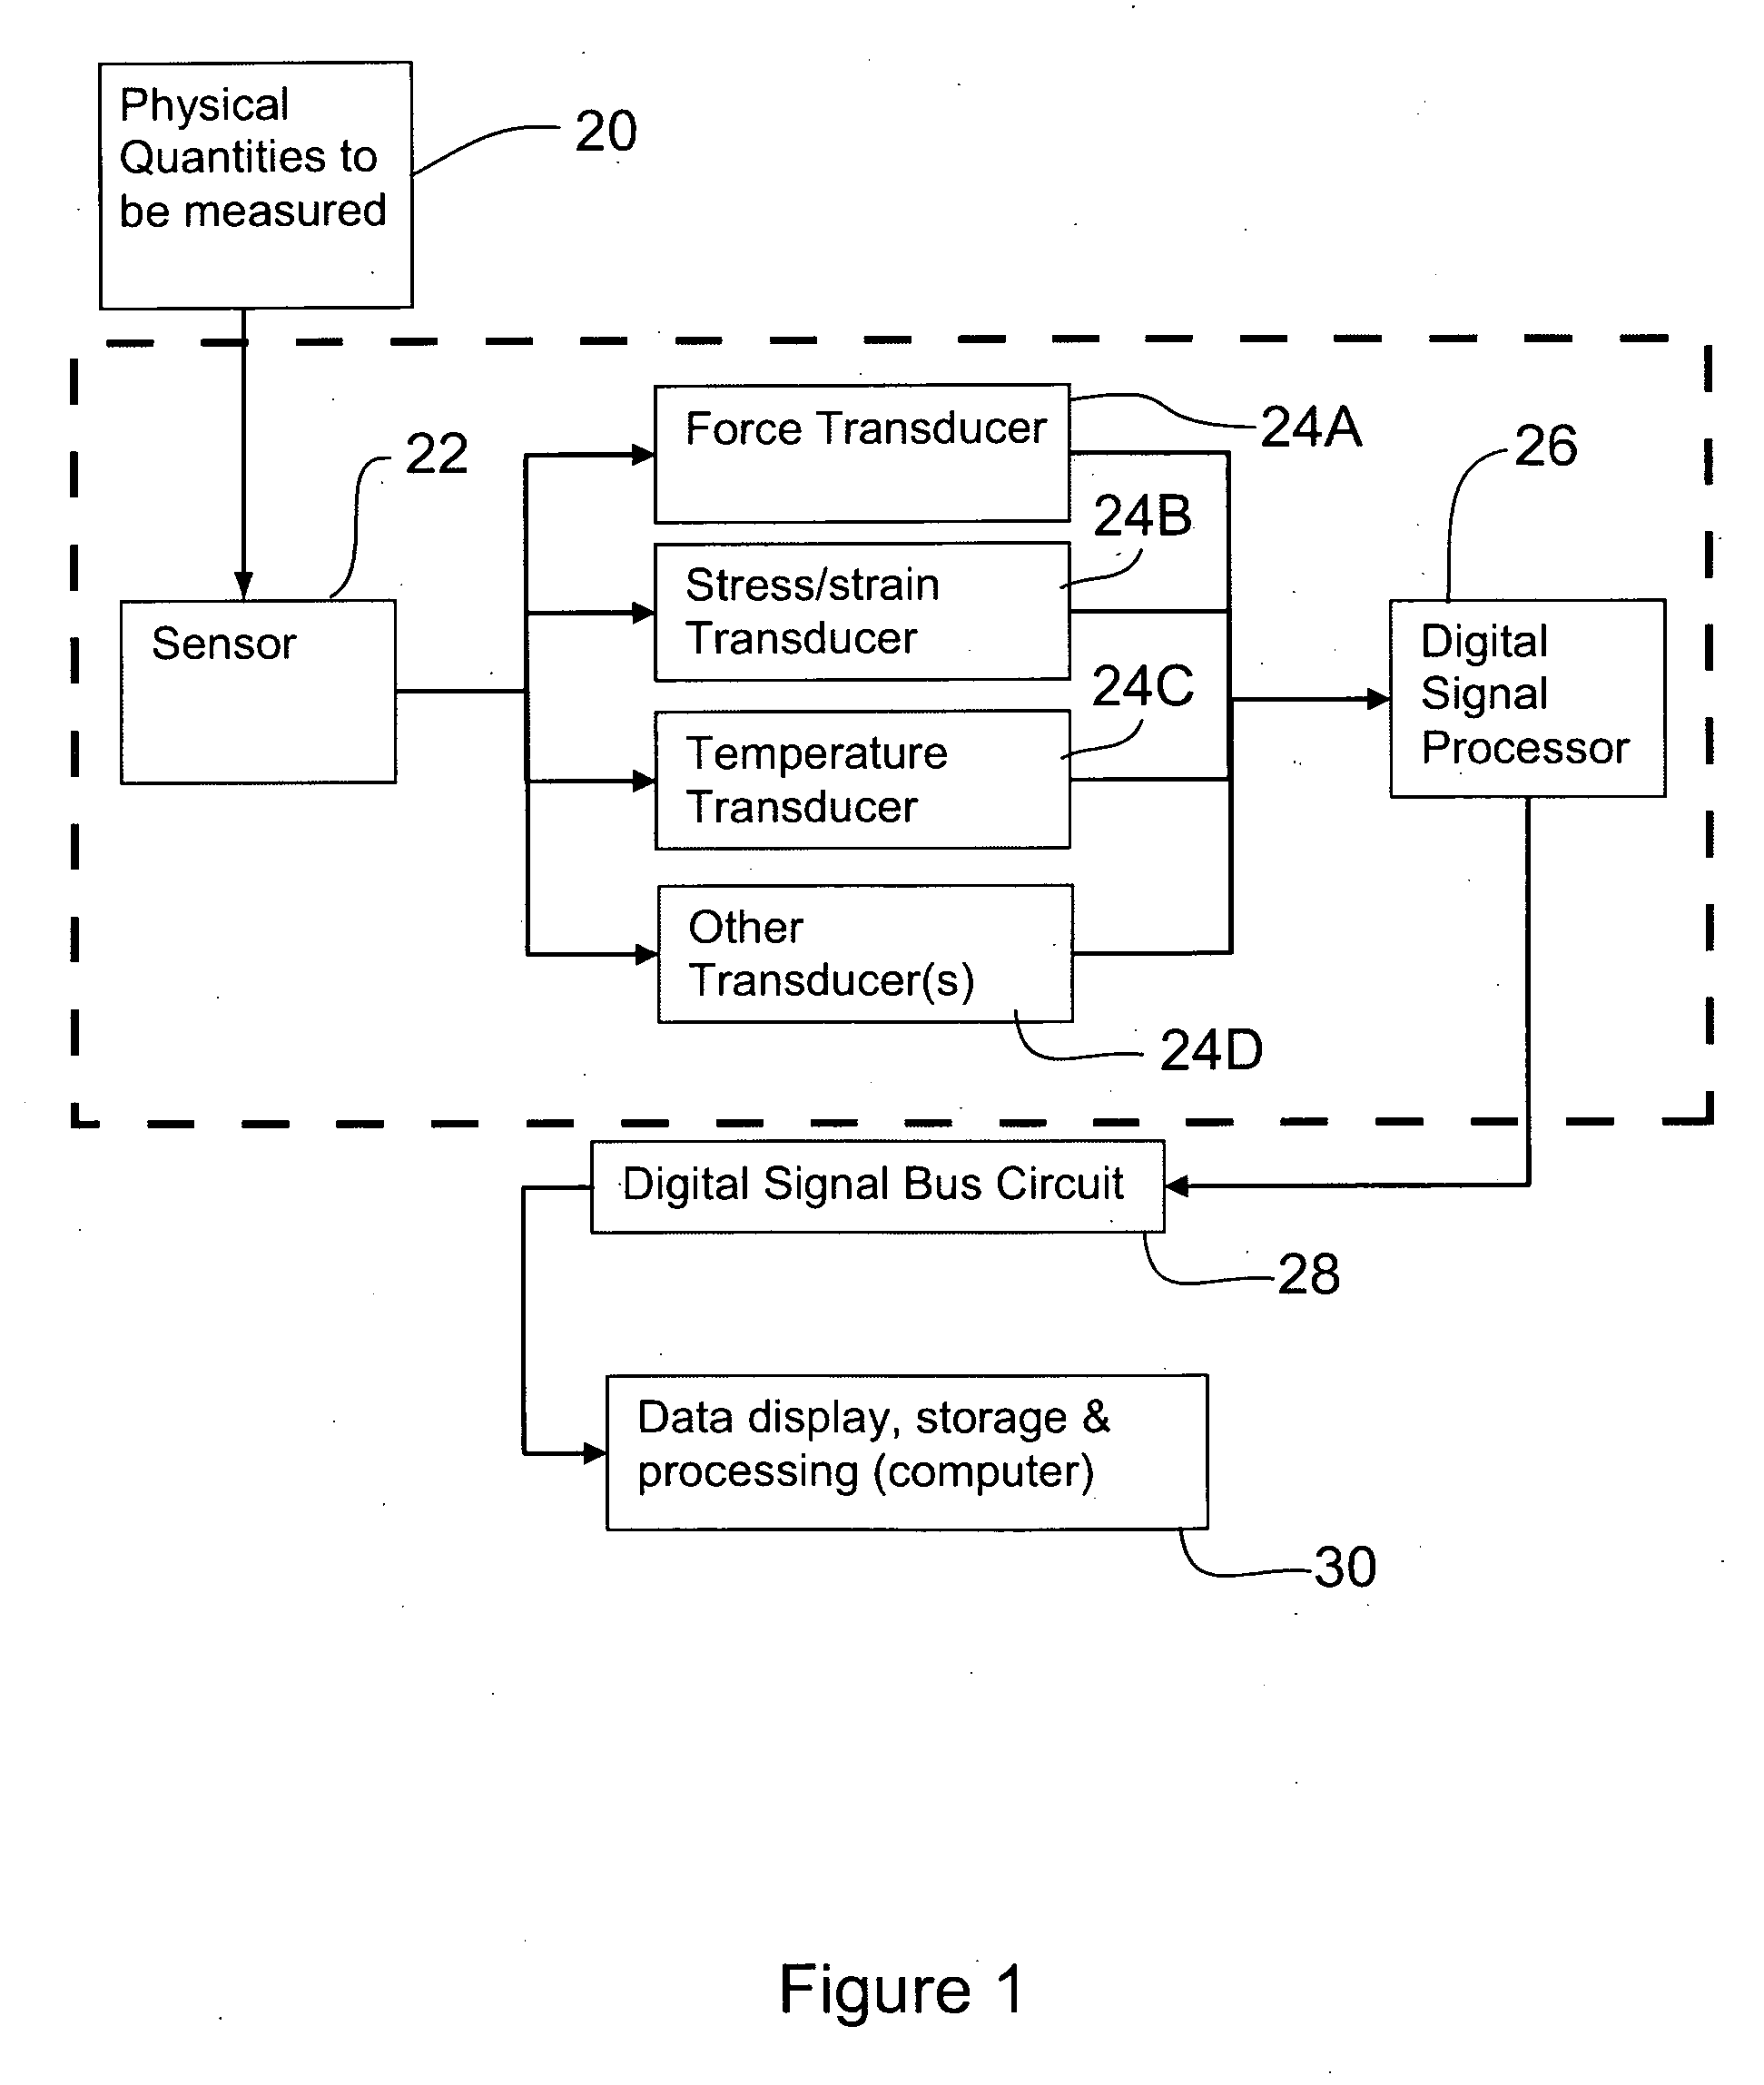 Integrated transducer data system